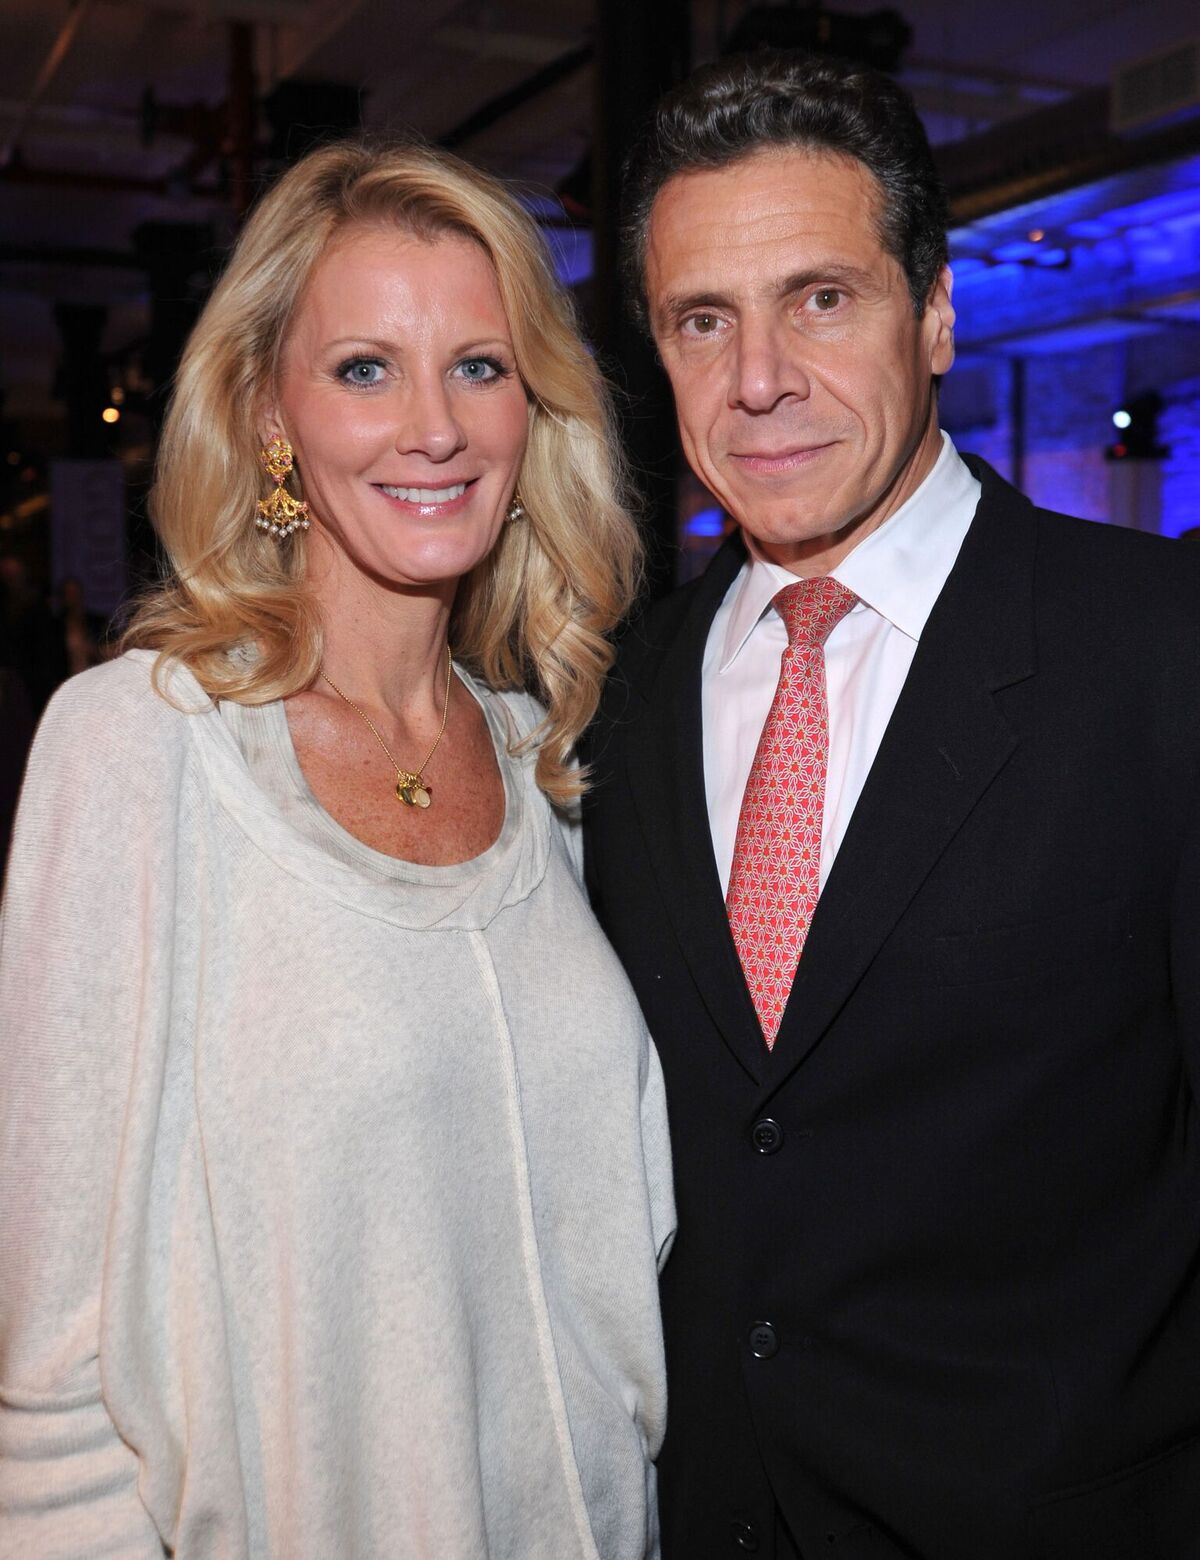 Sandra Lee and New York Governor Andrew Cuomo attend Diet Pepsi Spices Up NYC's Wine and Food Festival in 2011 | Source: Getty Images